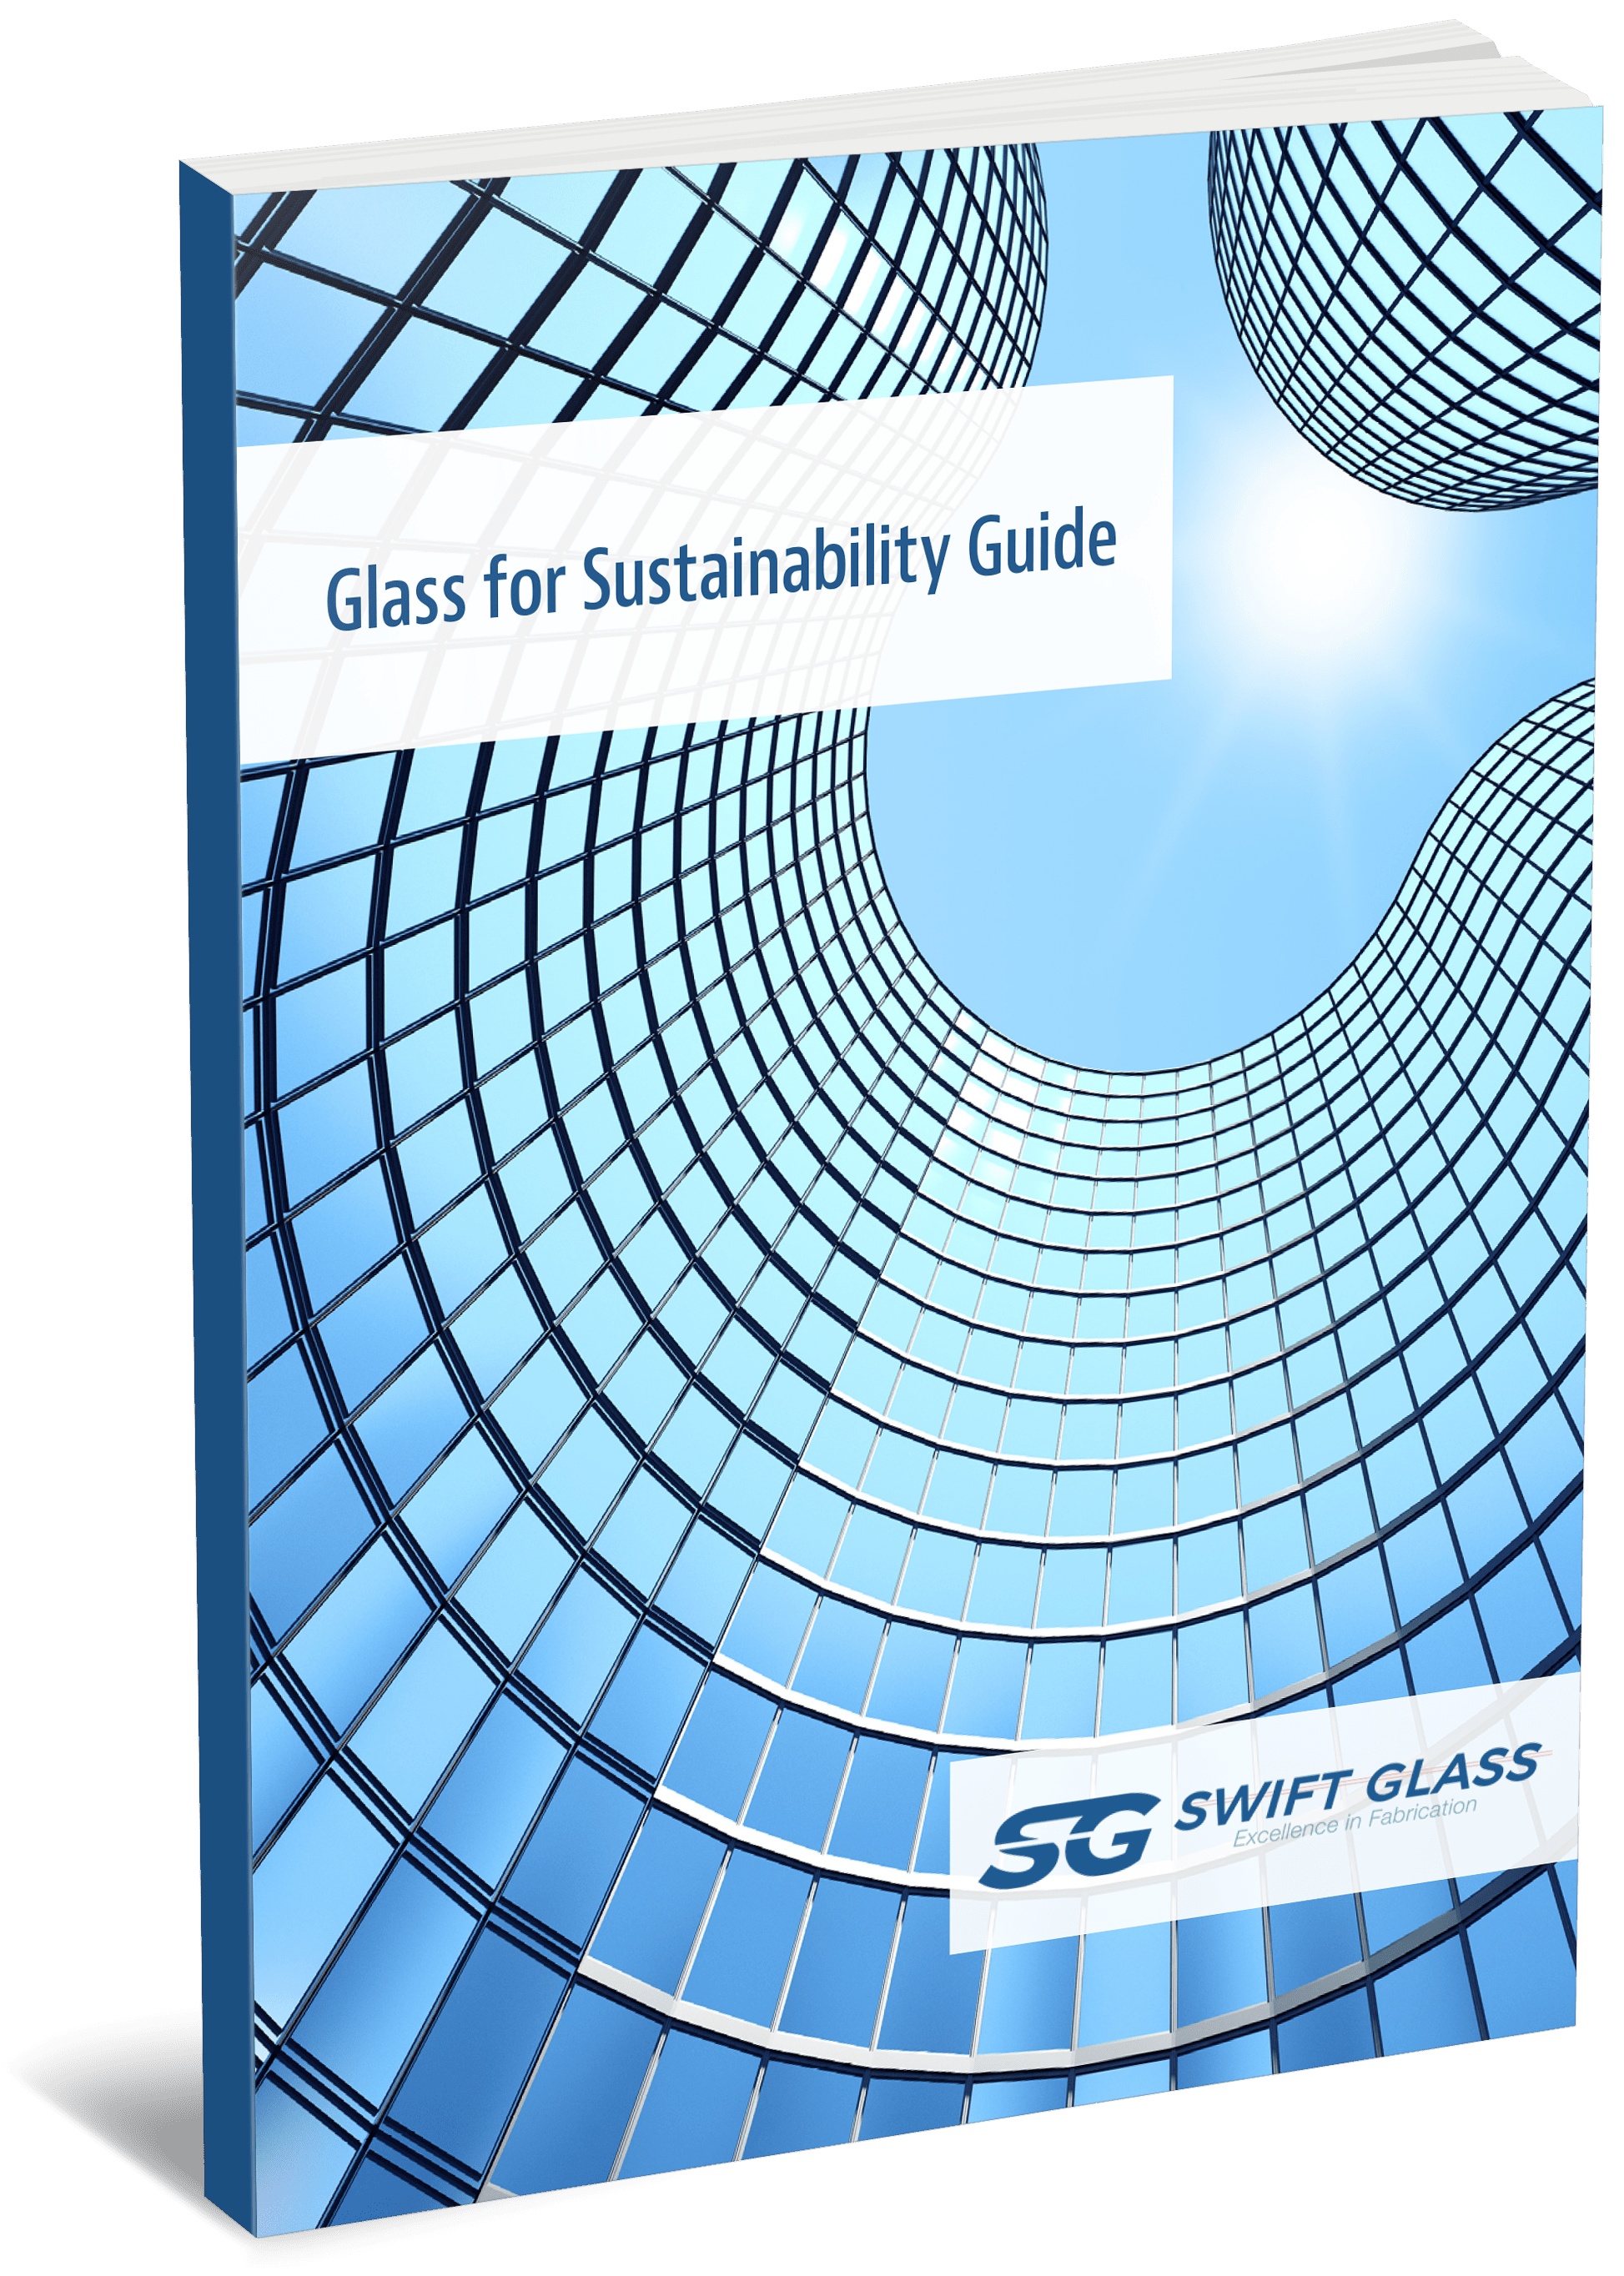 Glass for Sustainability Guide